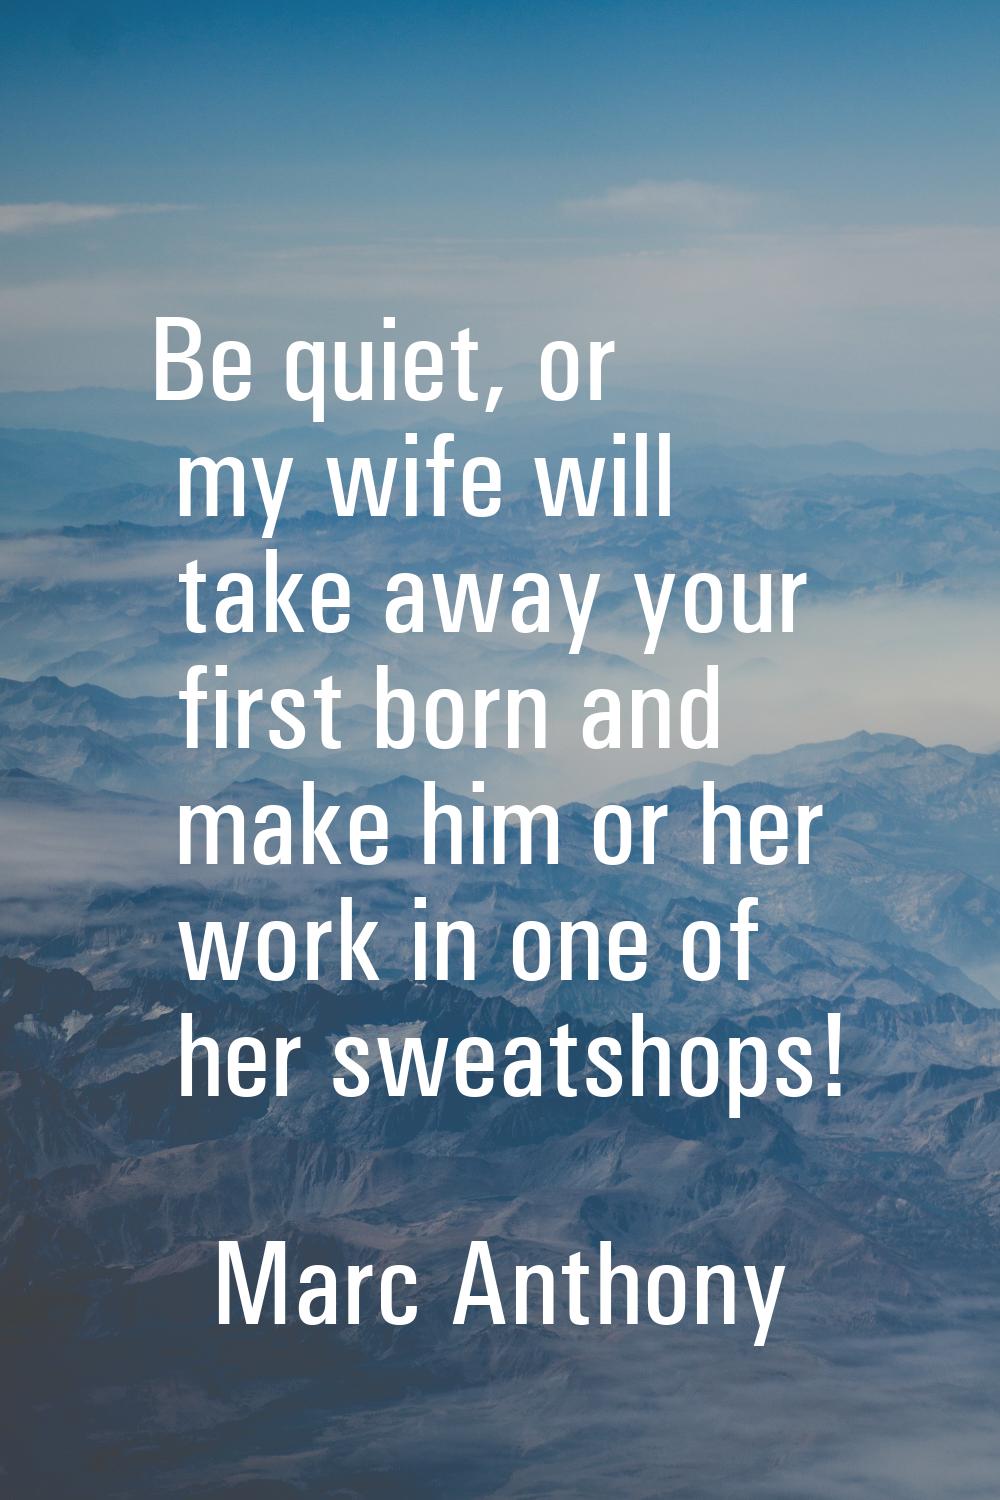 Be quiet, or my wife will take away your first born and make him or her work in one of her sweatsho